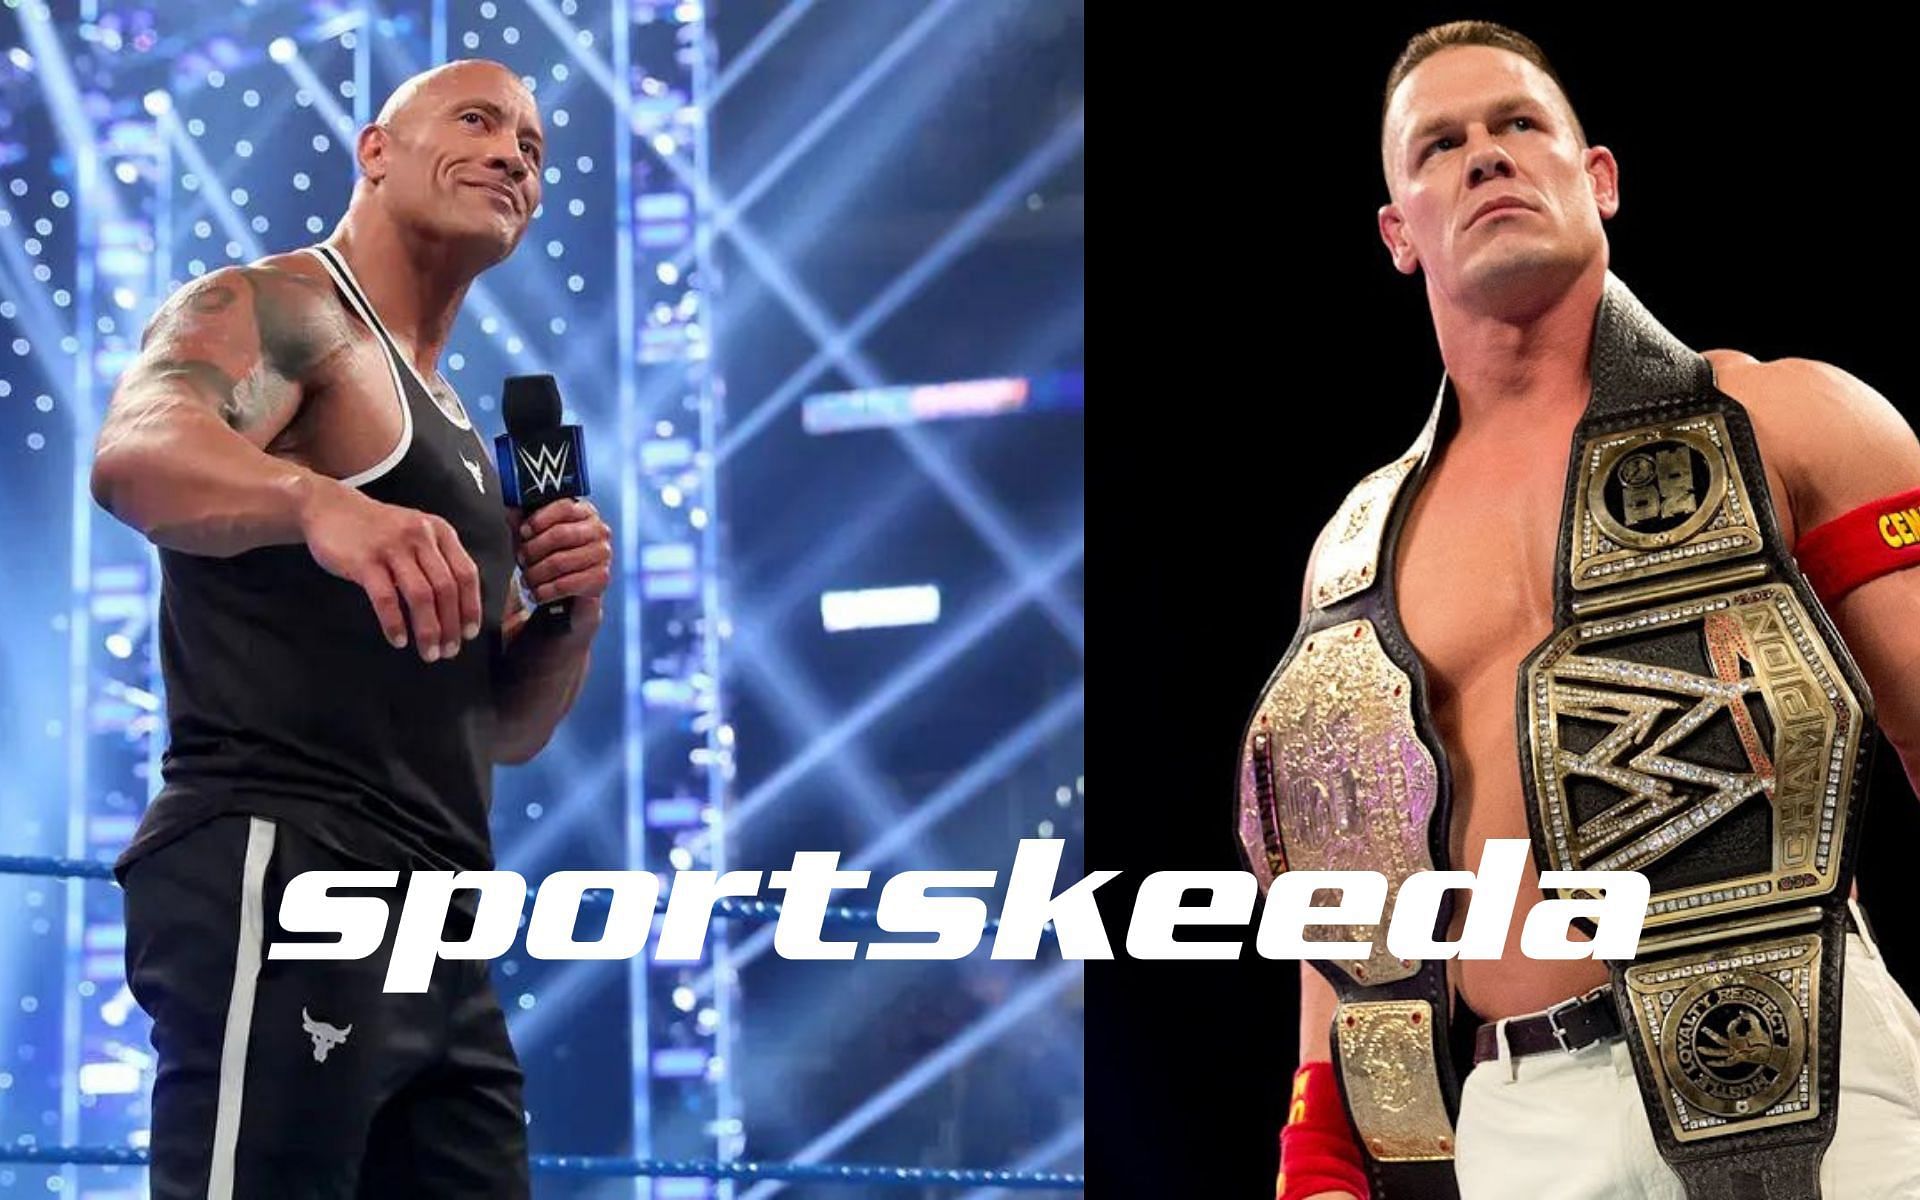 The Rock and John Cena have provided some huge WrestleMania moments!